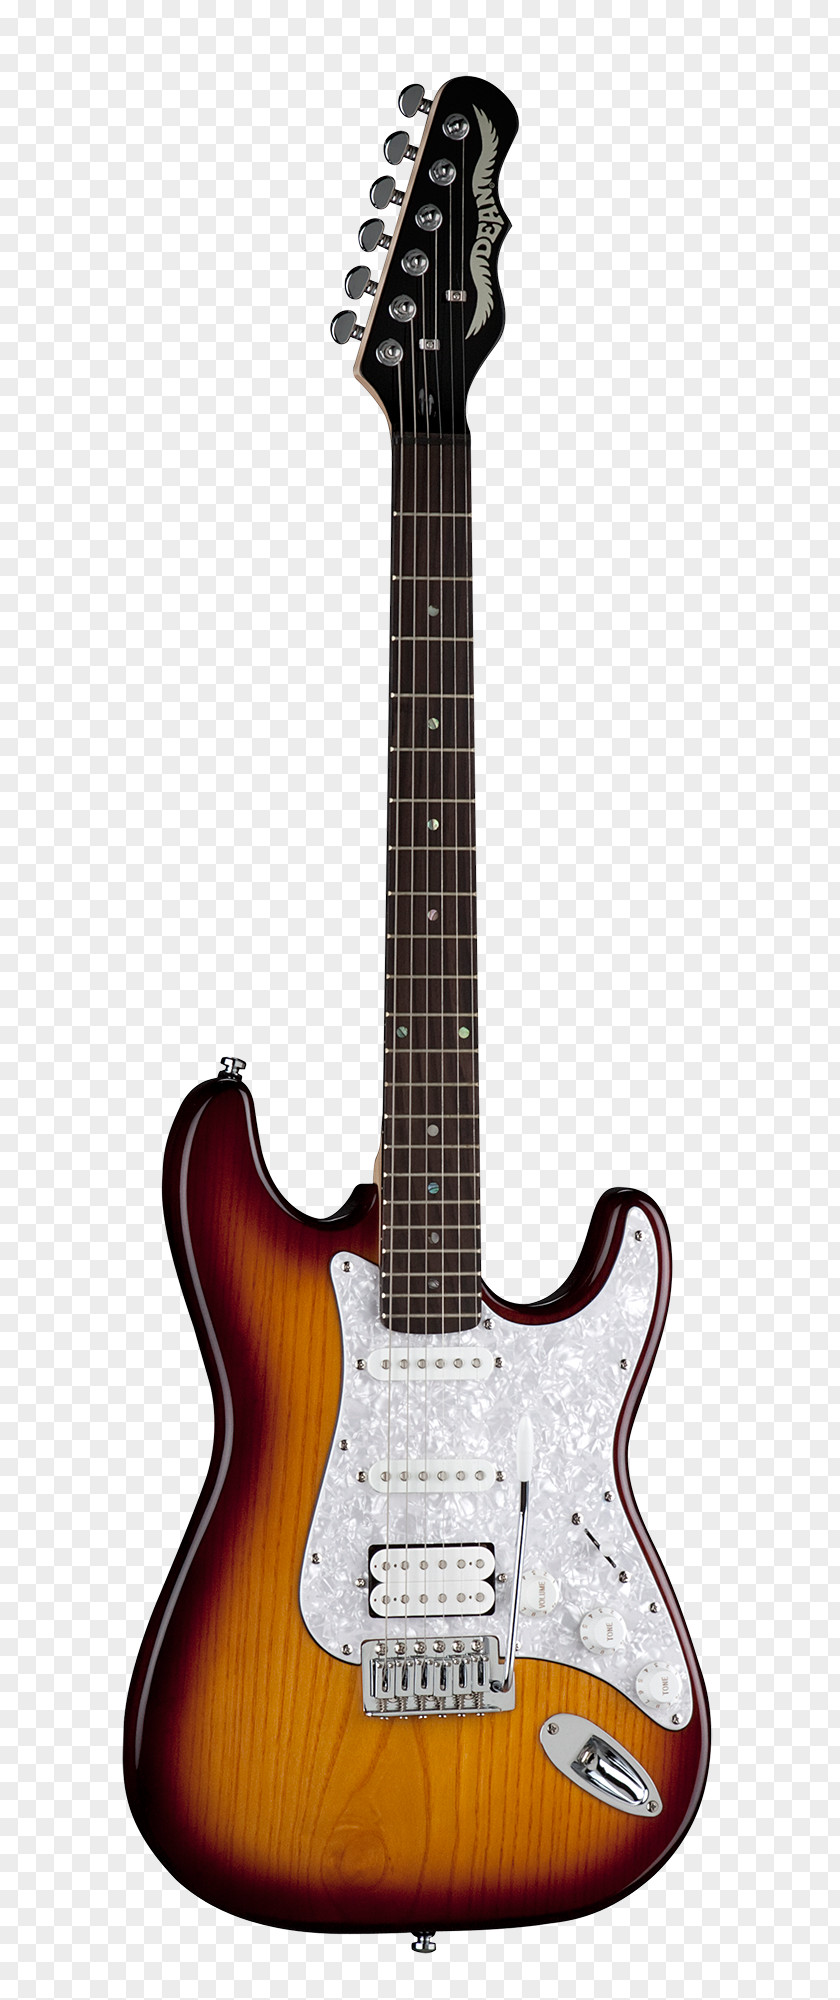 Electric Guitar Fender Stratocaster Precision Bass Solid Body PNG